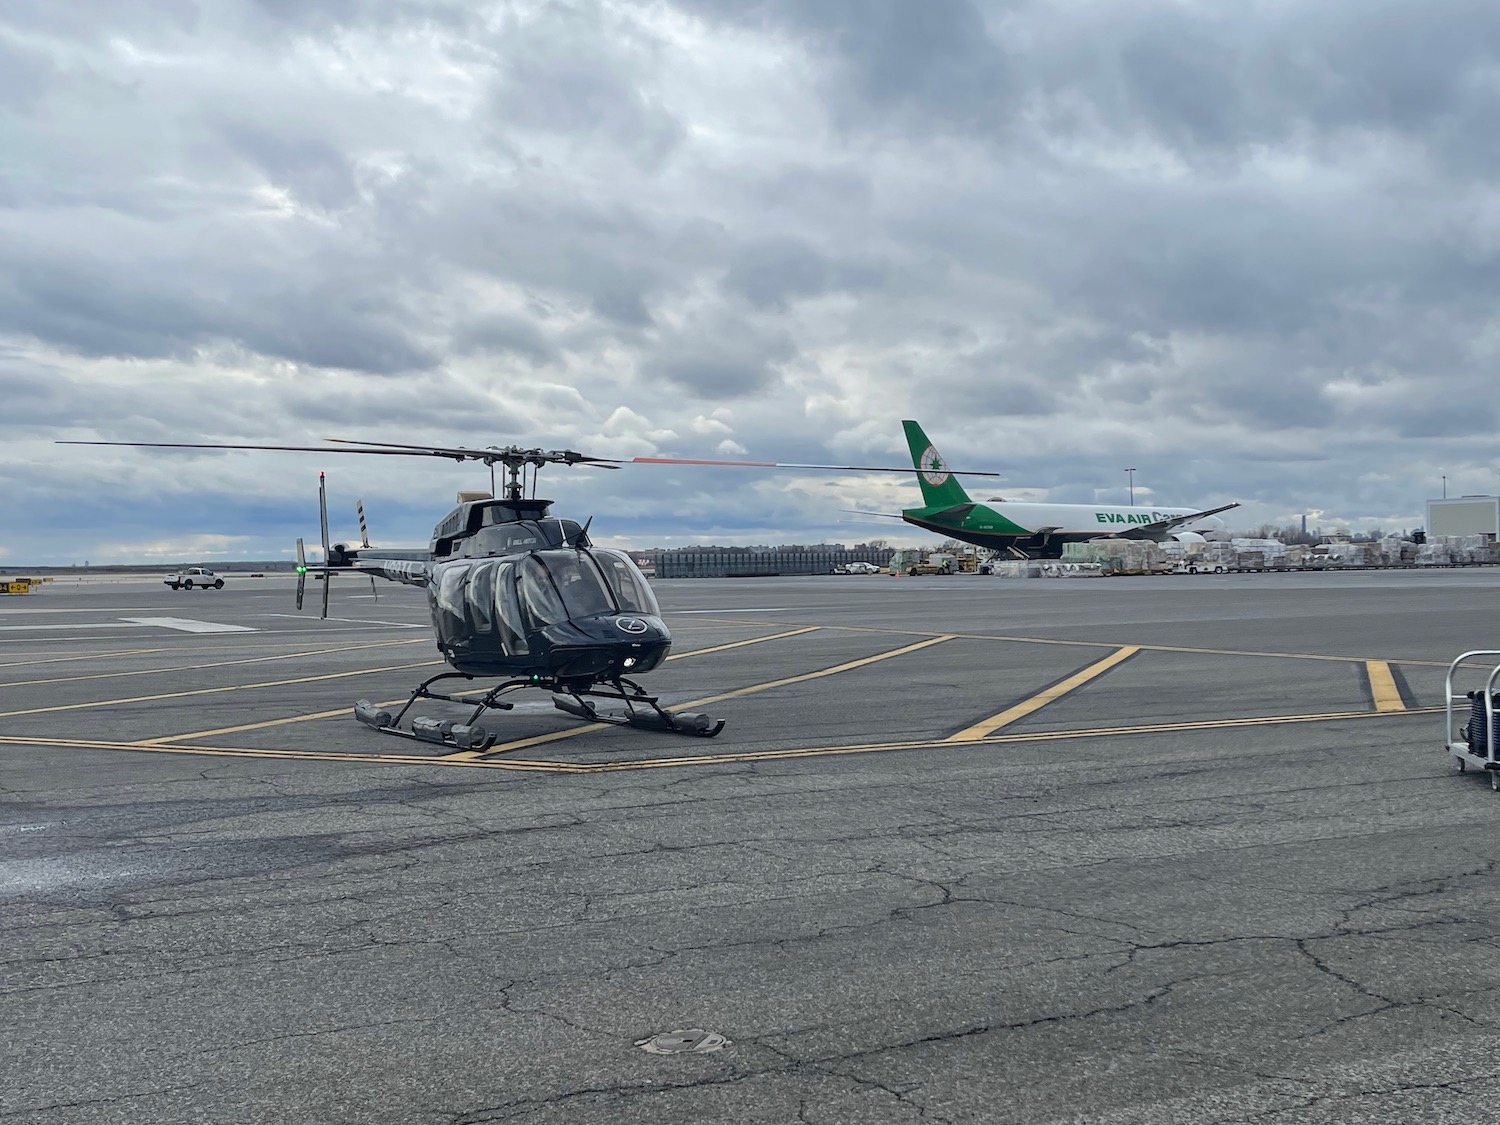 a helicopter on the ground